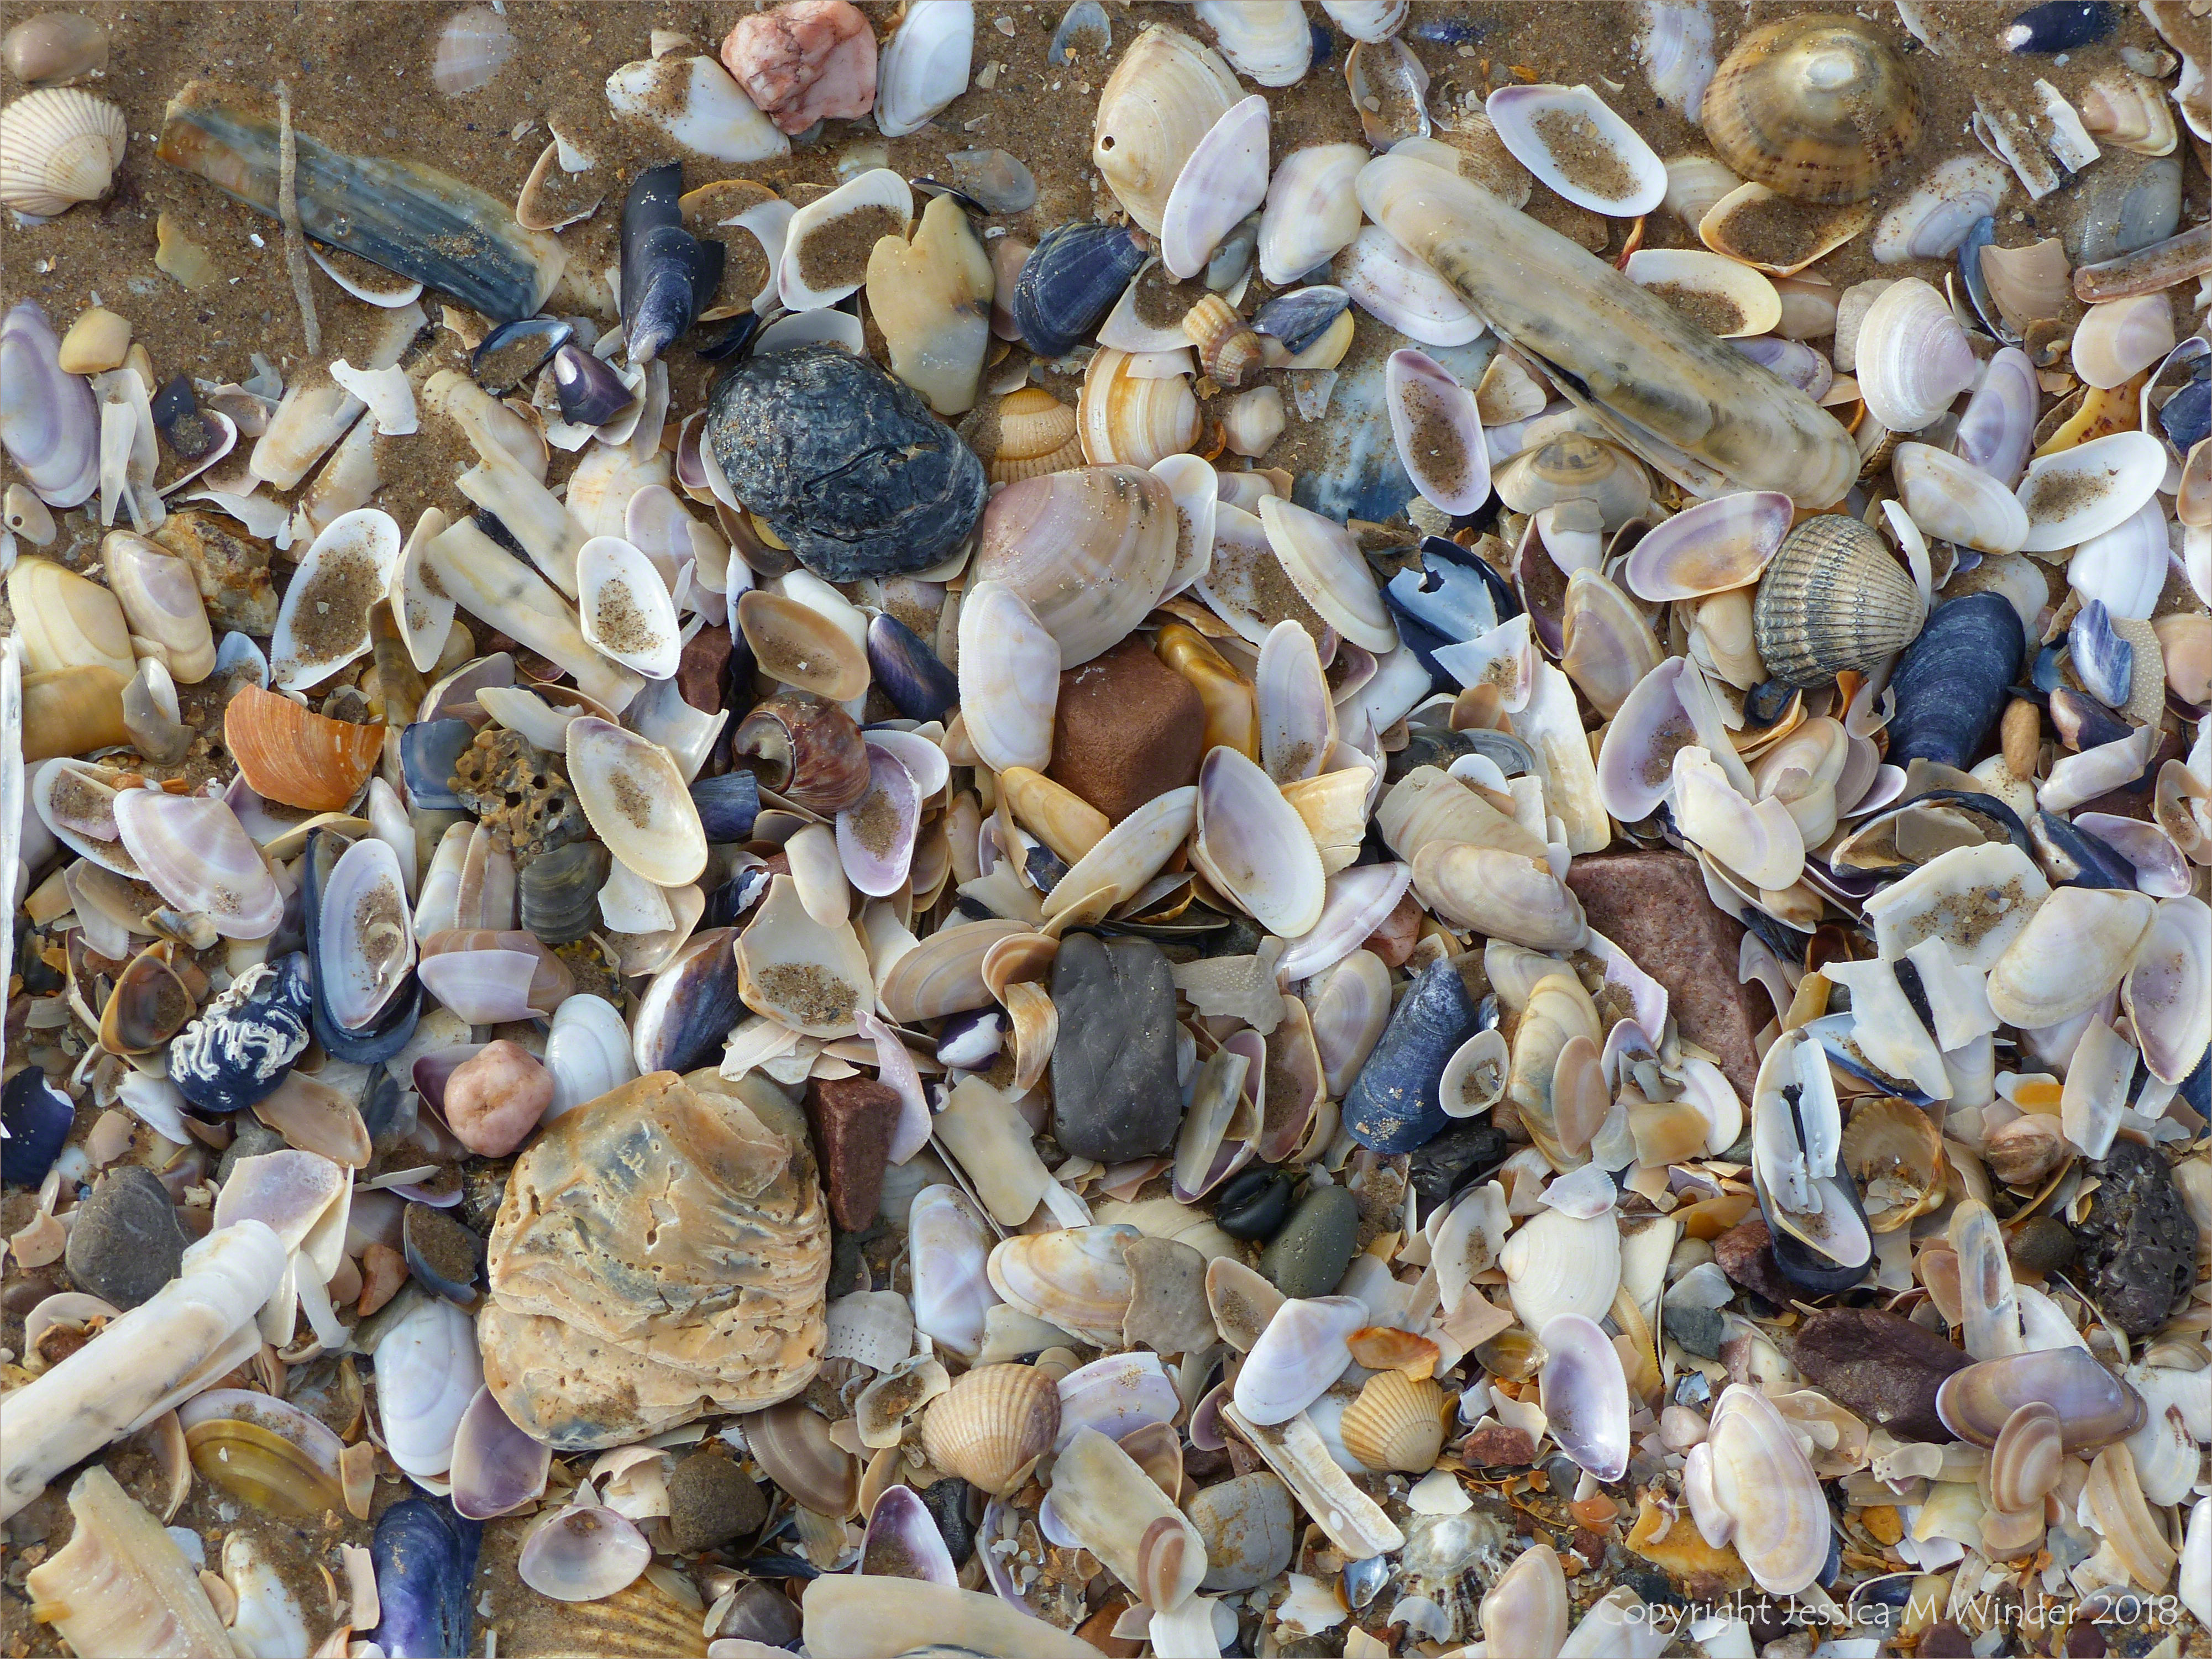 Old oyster shells on the beach with other common British seashells - oyster shell variations